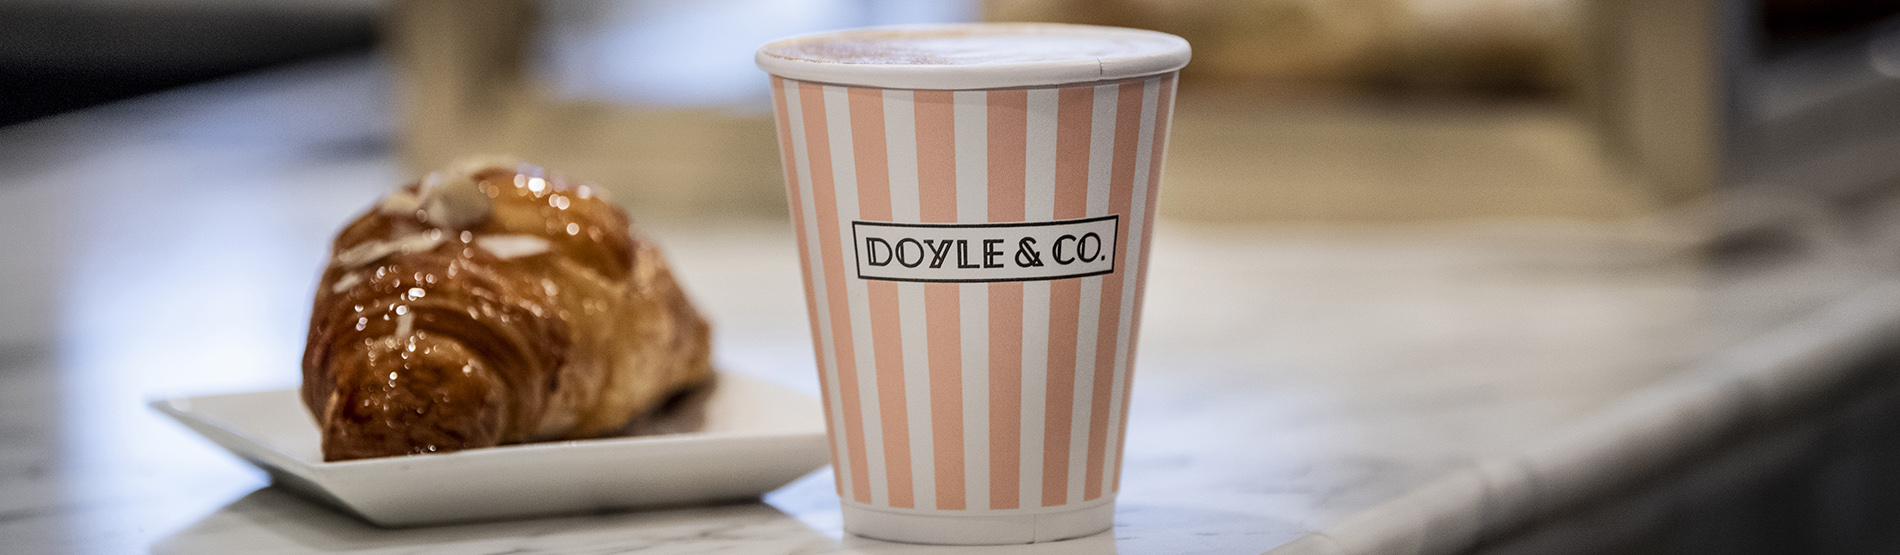 Coffee and a Croissant at Doyle and Co